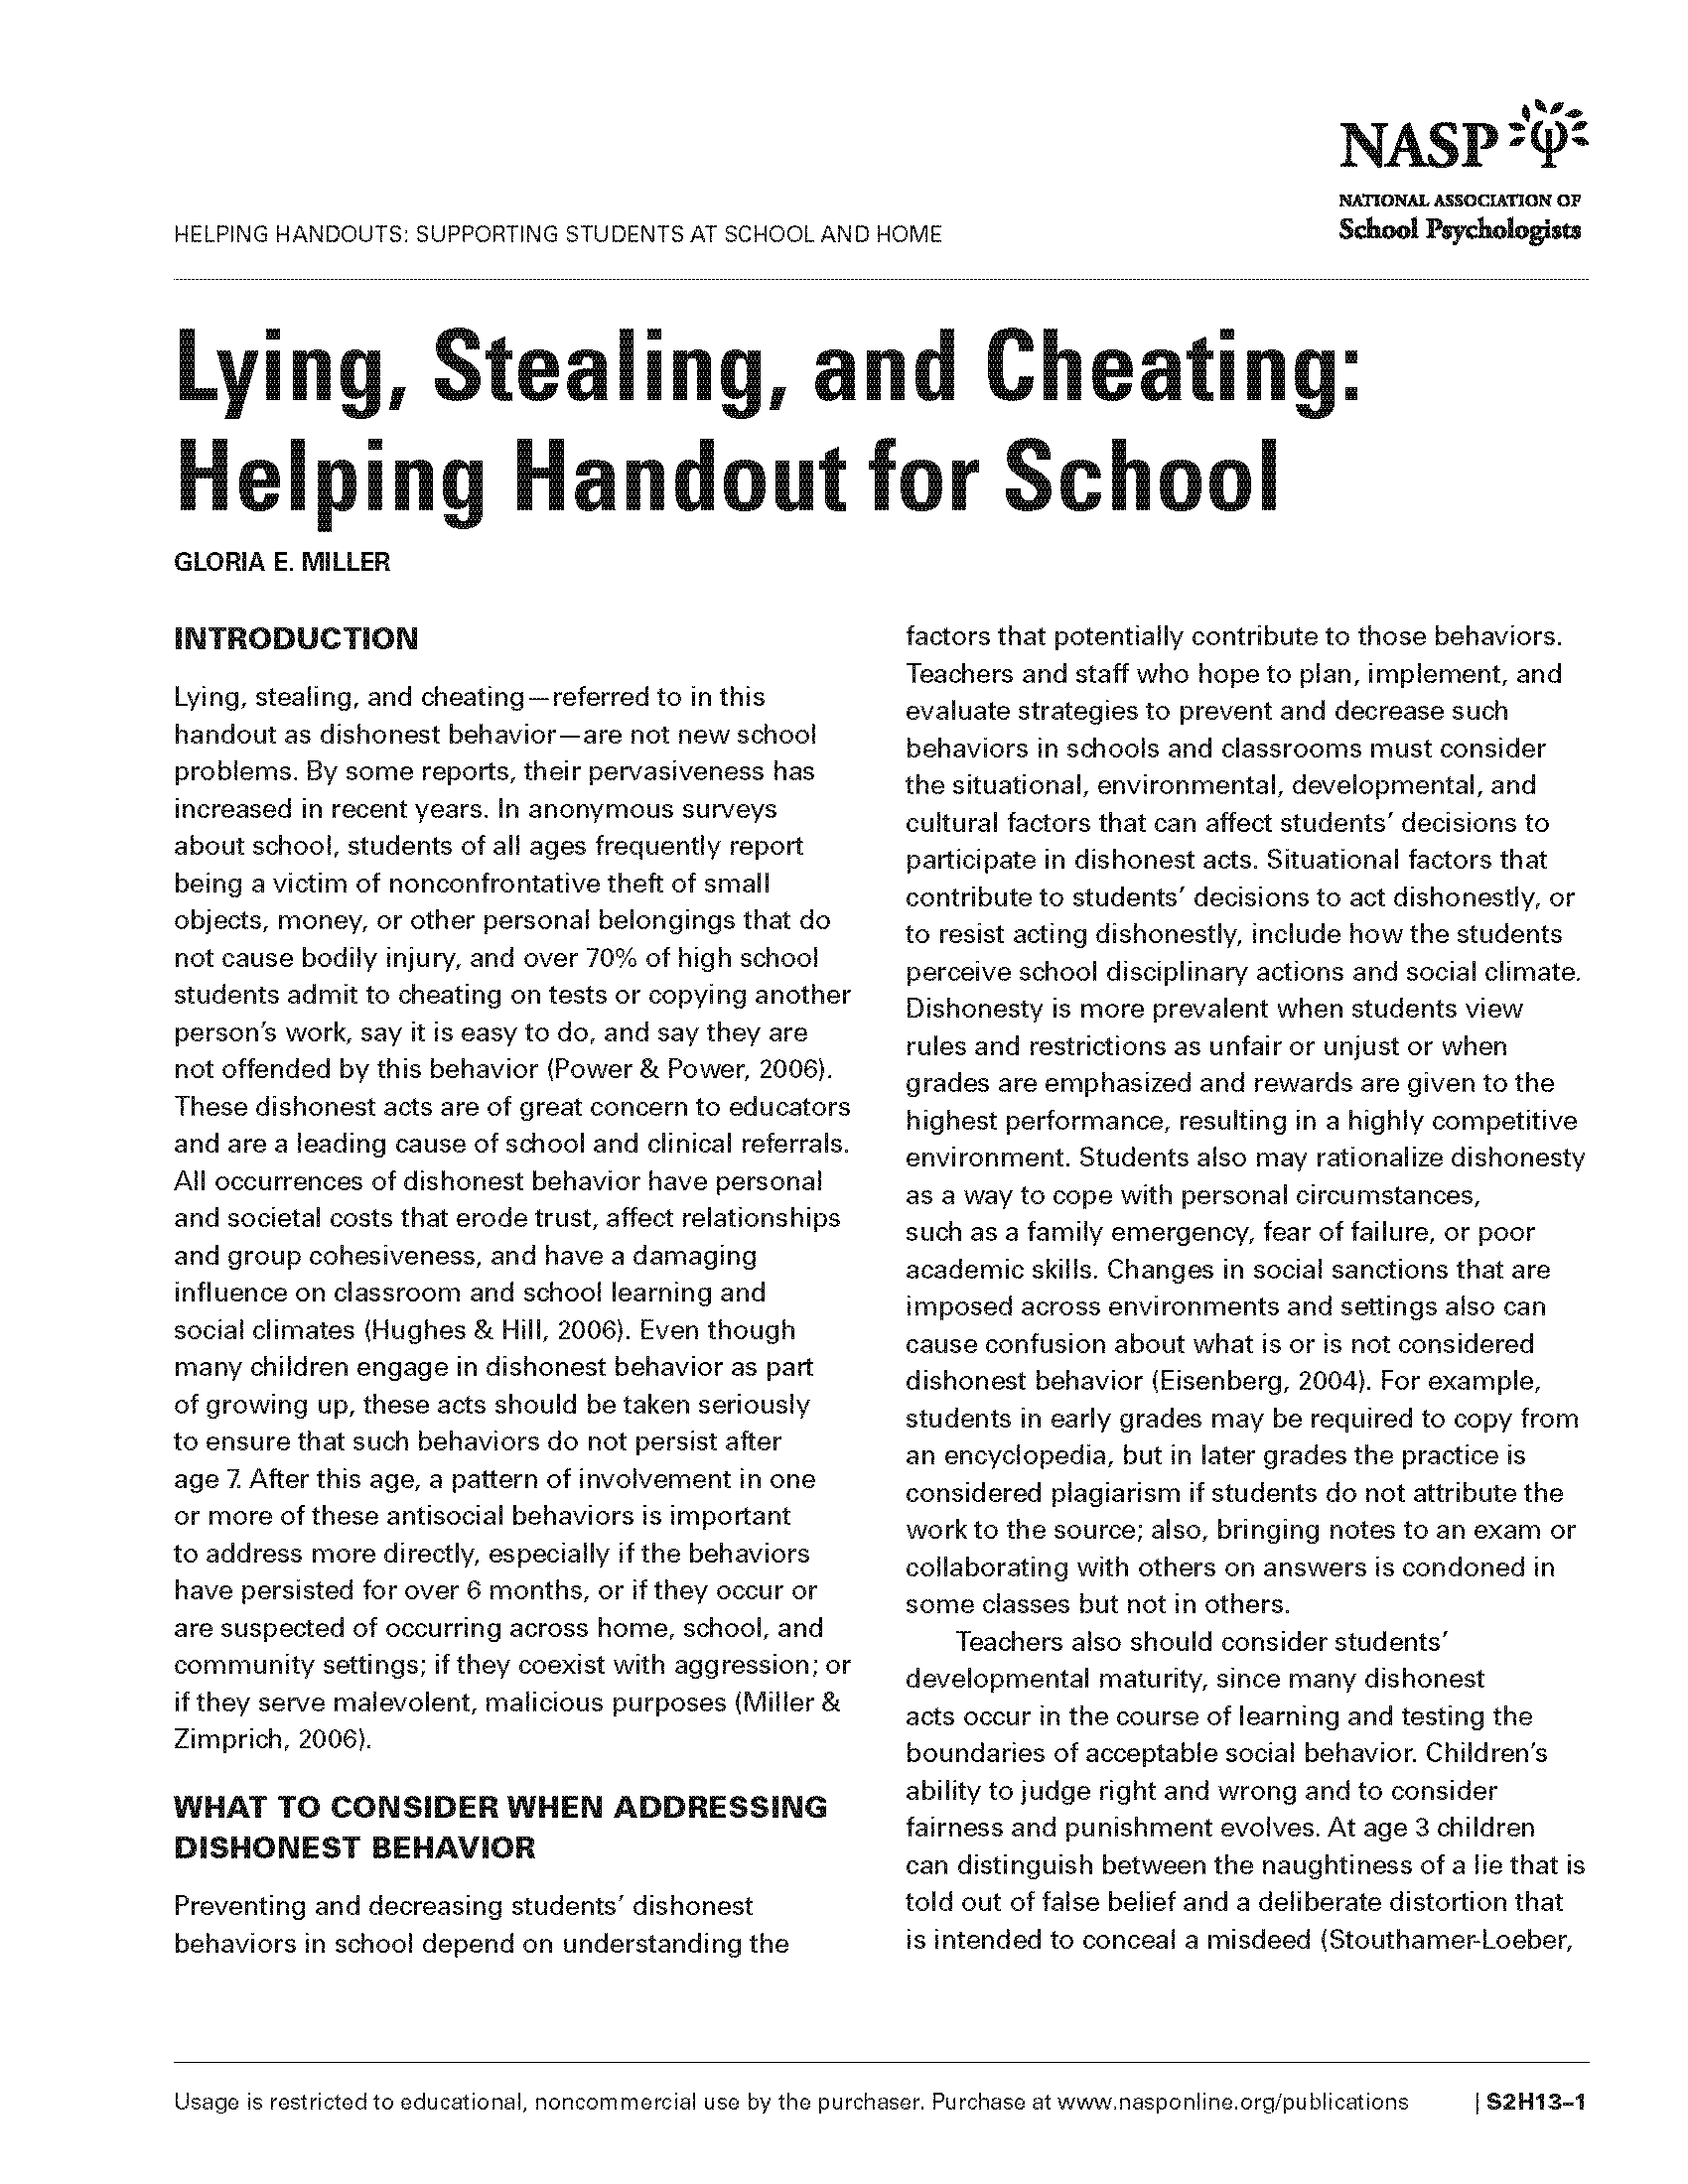 Lying, Stealing, and Cheating: Helping Handout for School